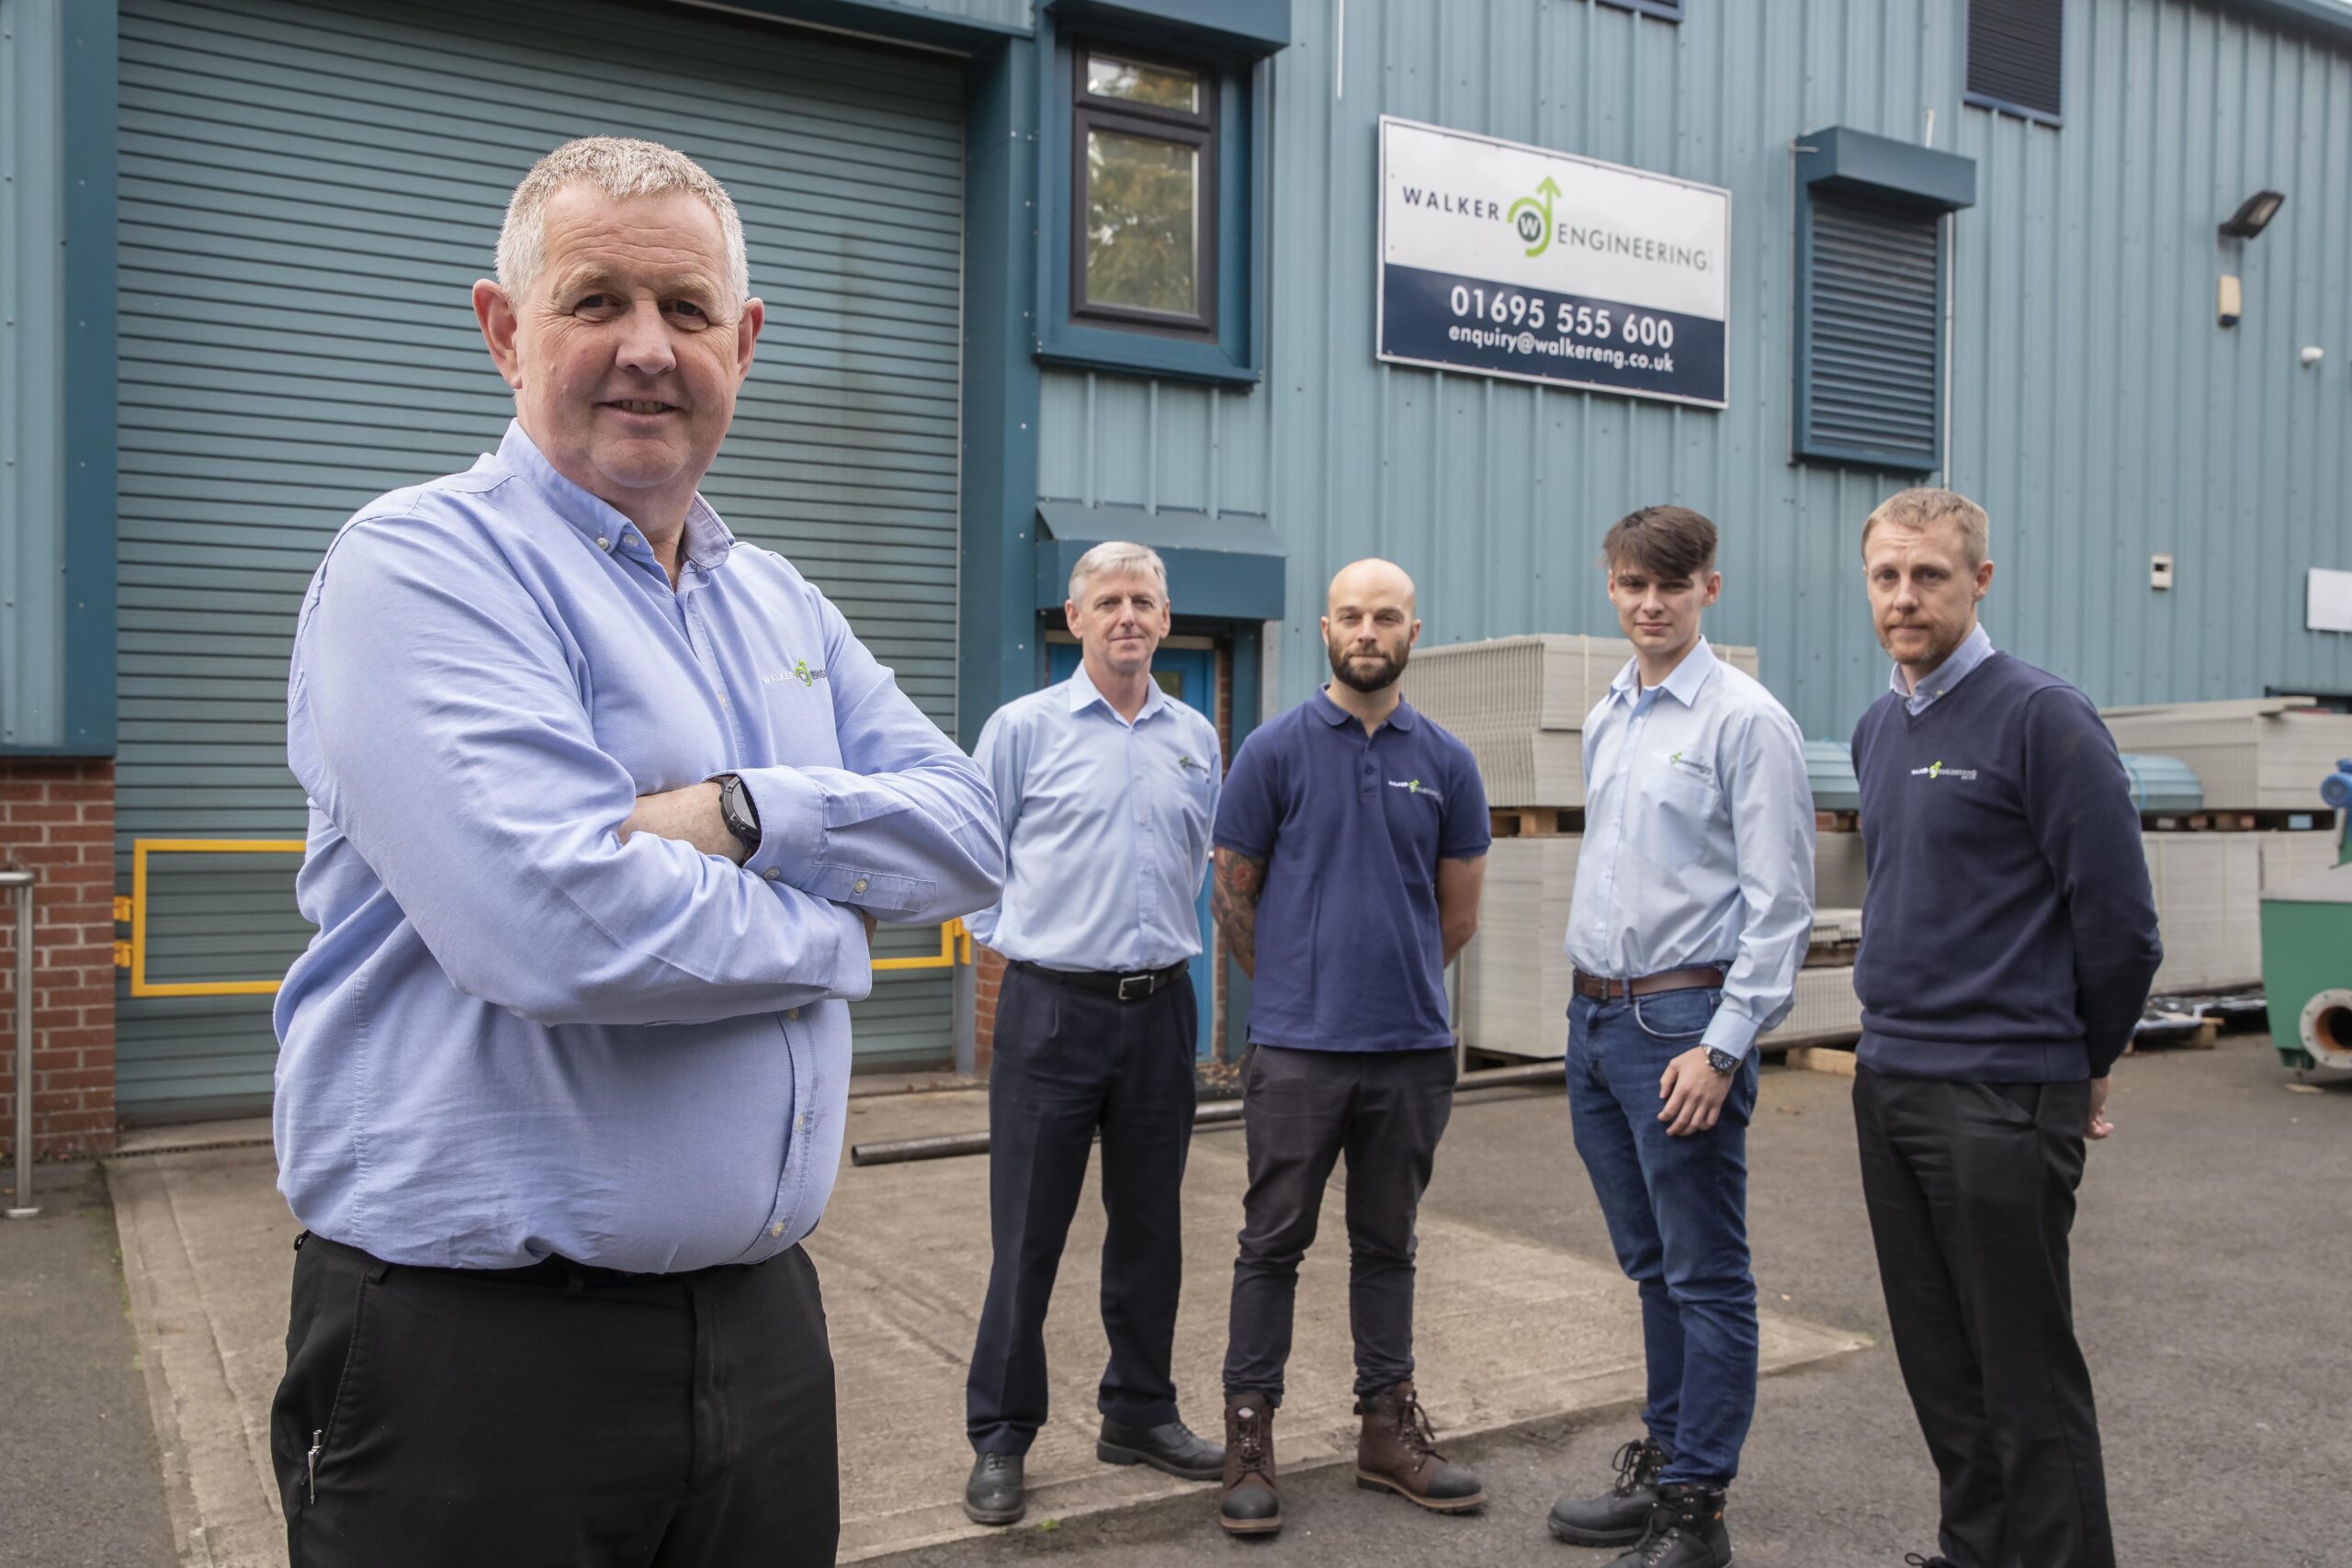 Walker Engineering is shortlisted in two categories at the 2023 North West Family Business Awards